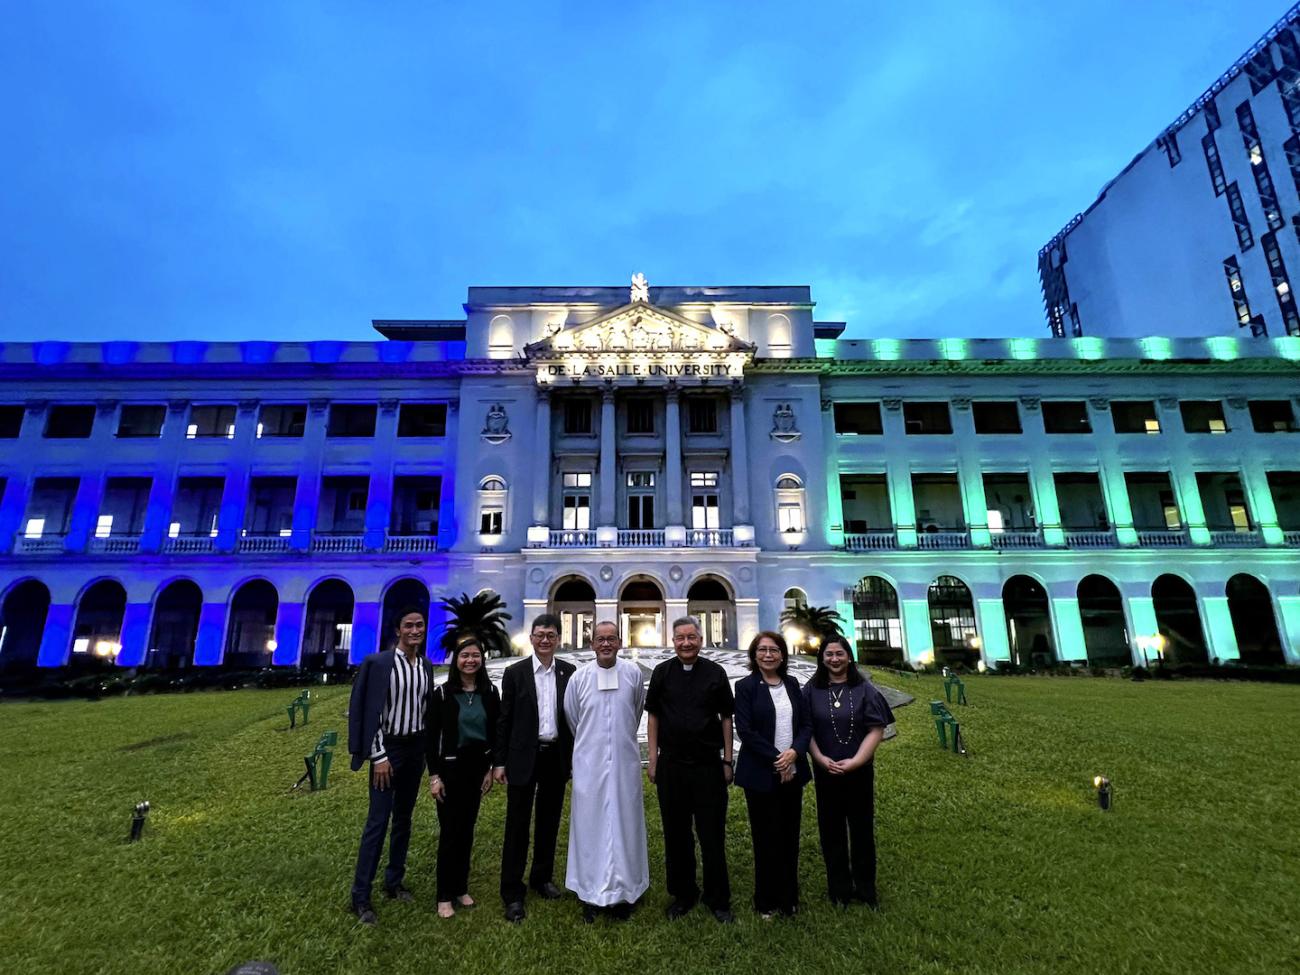 Standing before the iconic De La Salle building lit up in the colors of both schools. Left to right - Dr Norby R Salonga; Ms Fritzie Ian P De Vera; Dr Robert Roleda; Brother Bernard S Oca, FSC; Fr Roberto Yap, SJ; Dr Maria Luz Viches; Ms Ana Marina Tan